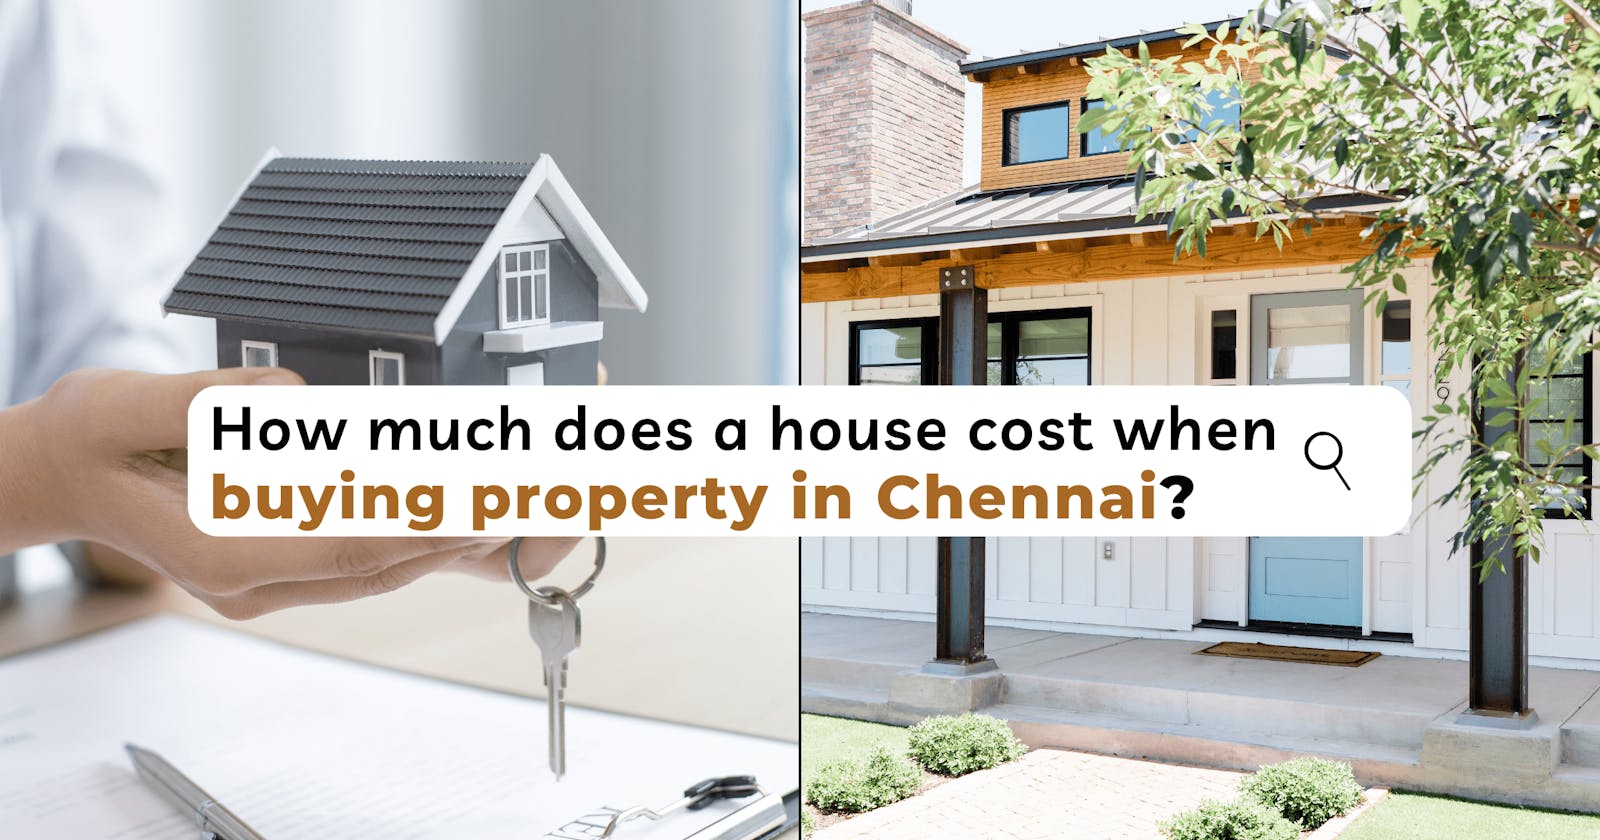 How much does a house cost when buying property in Chennai?